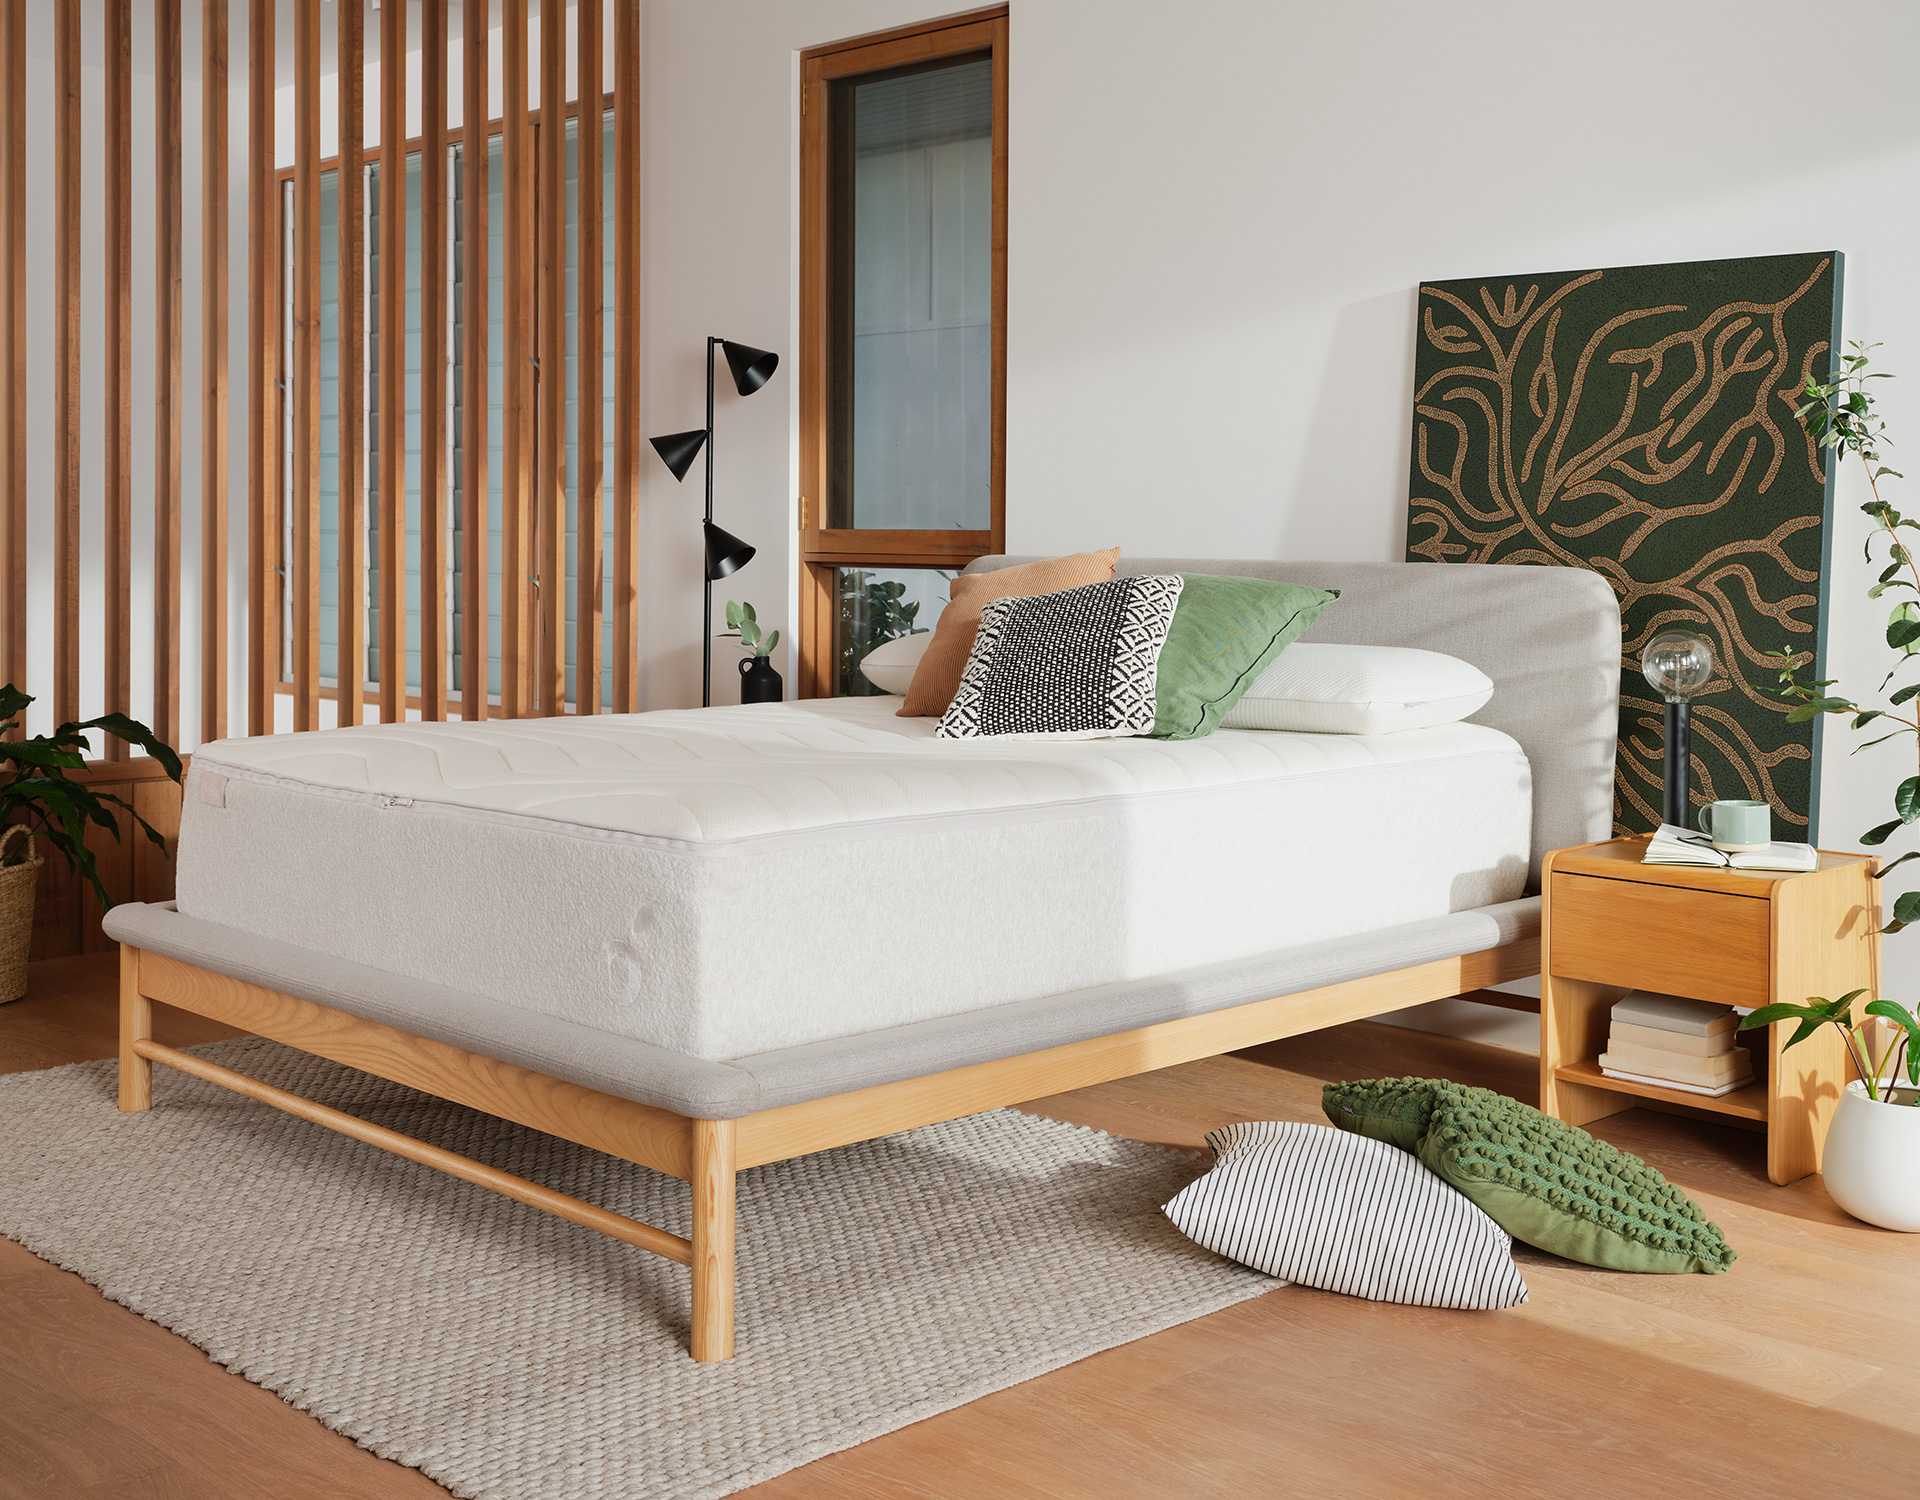 One of the best mattresses for heavier people in Australia, this supportive Koala mattress is dressed with cushions in a bright room